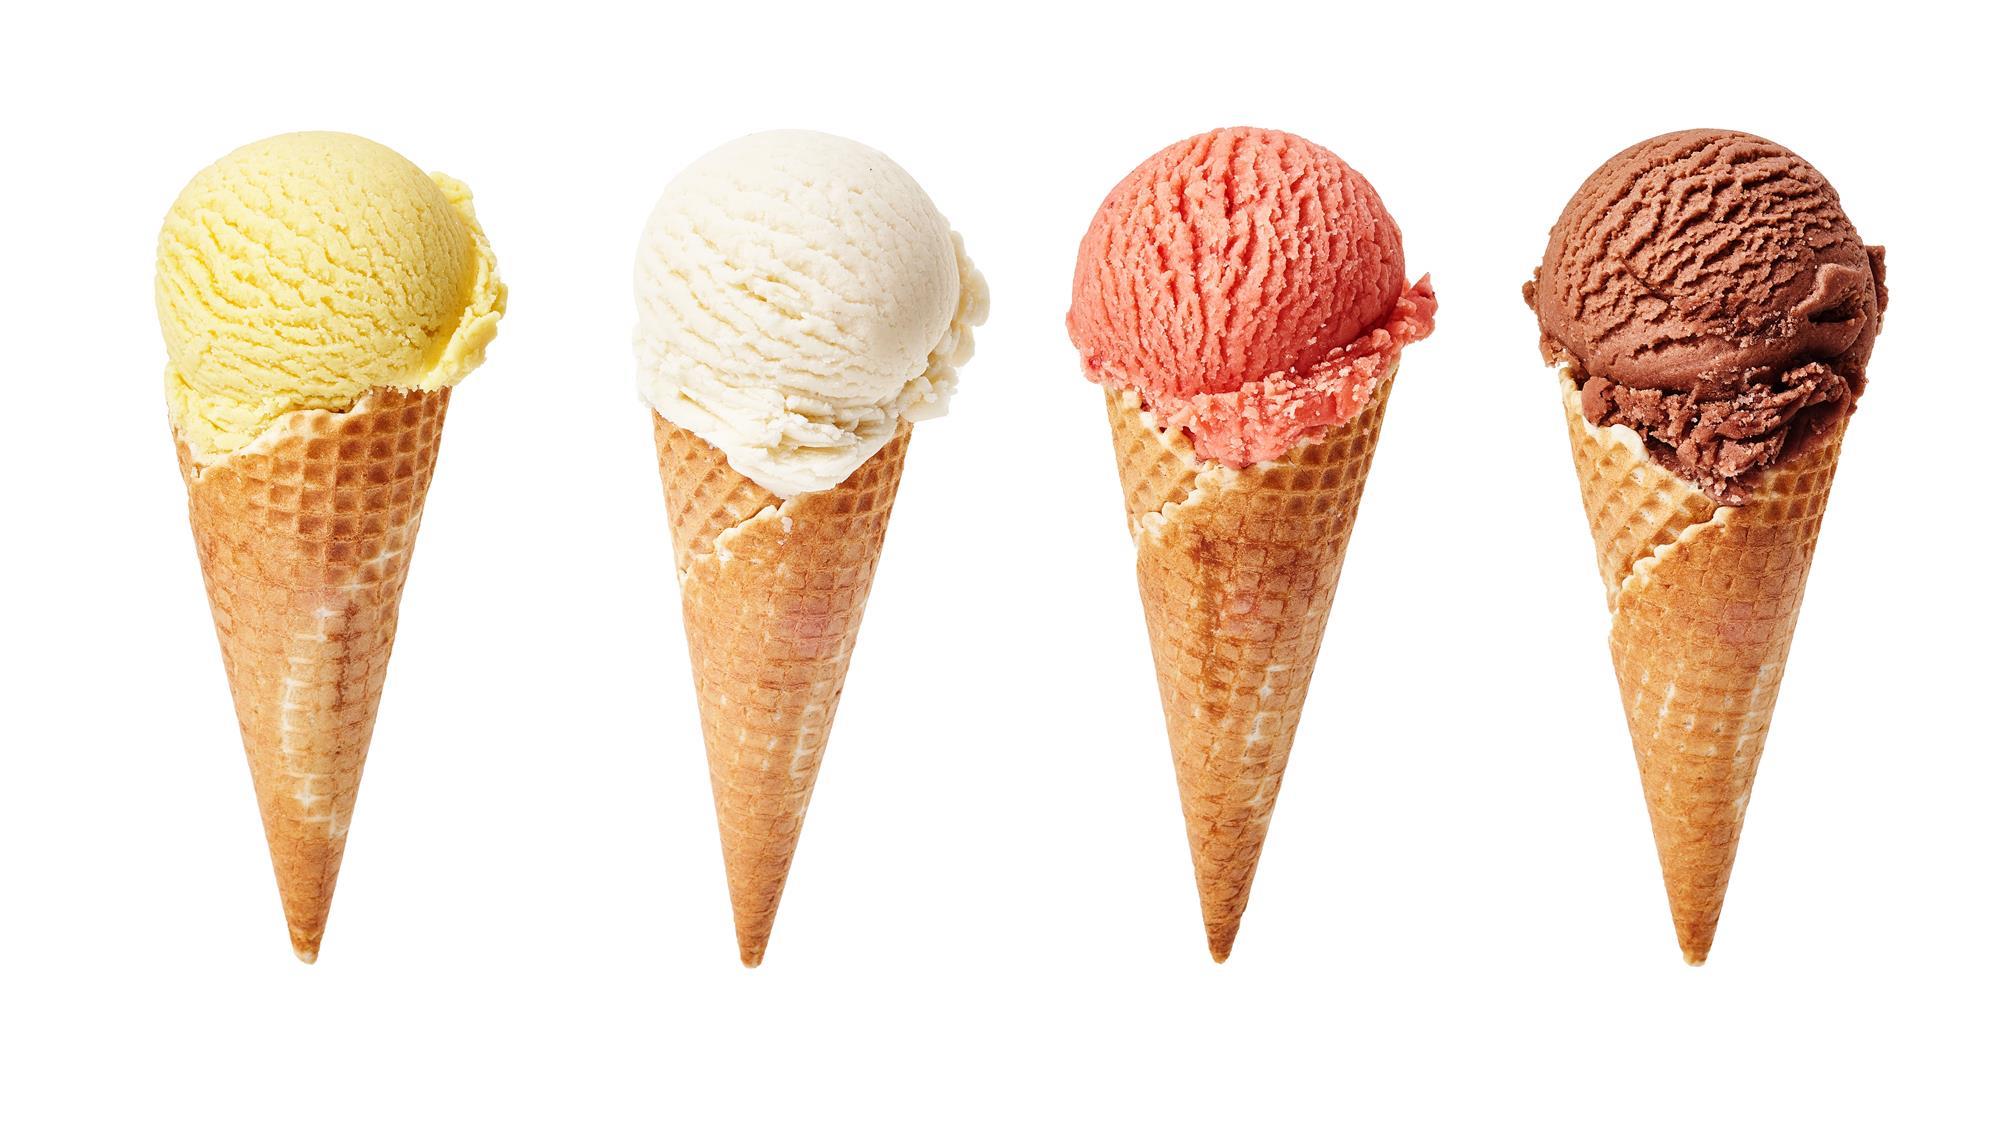 What's going on in your ice cream | News | Chemistry World